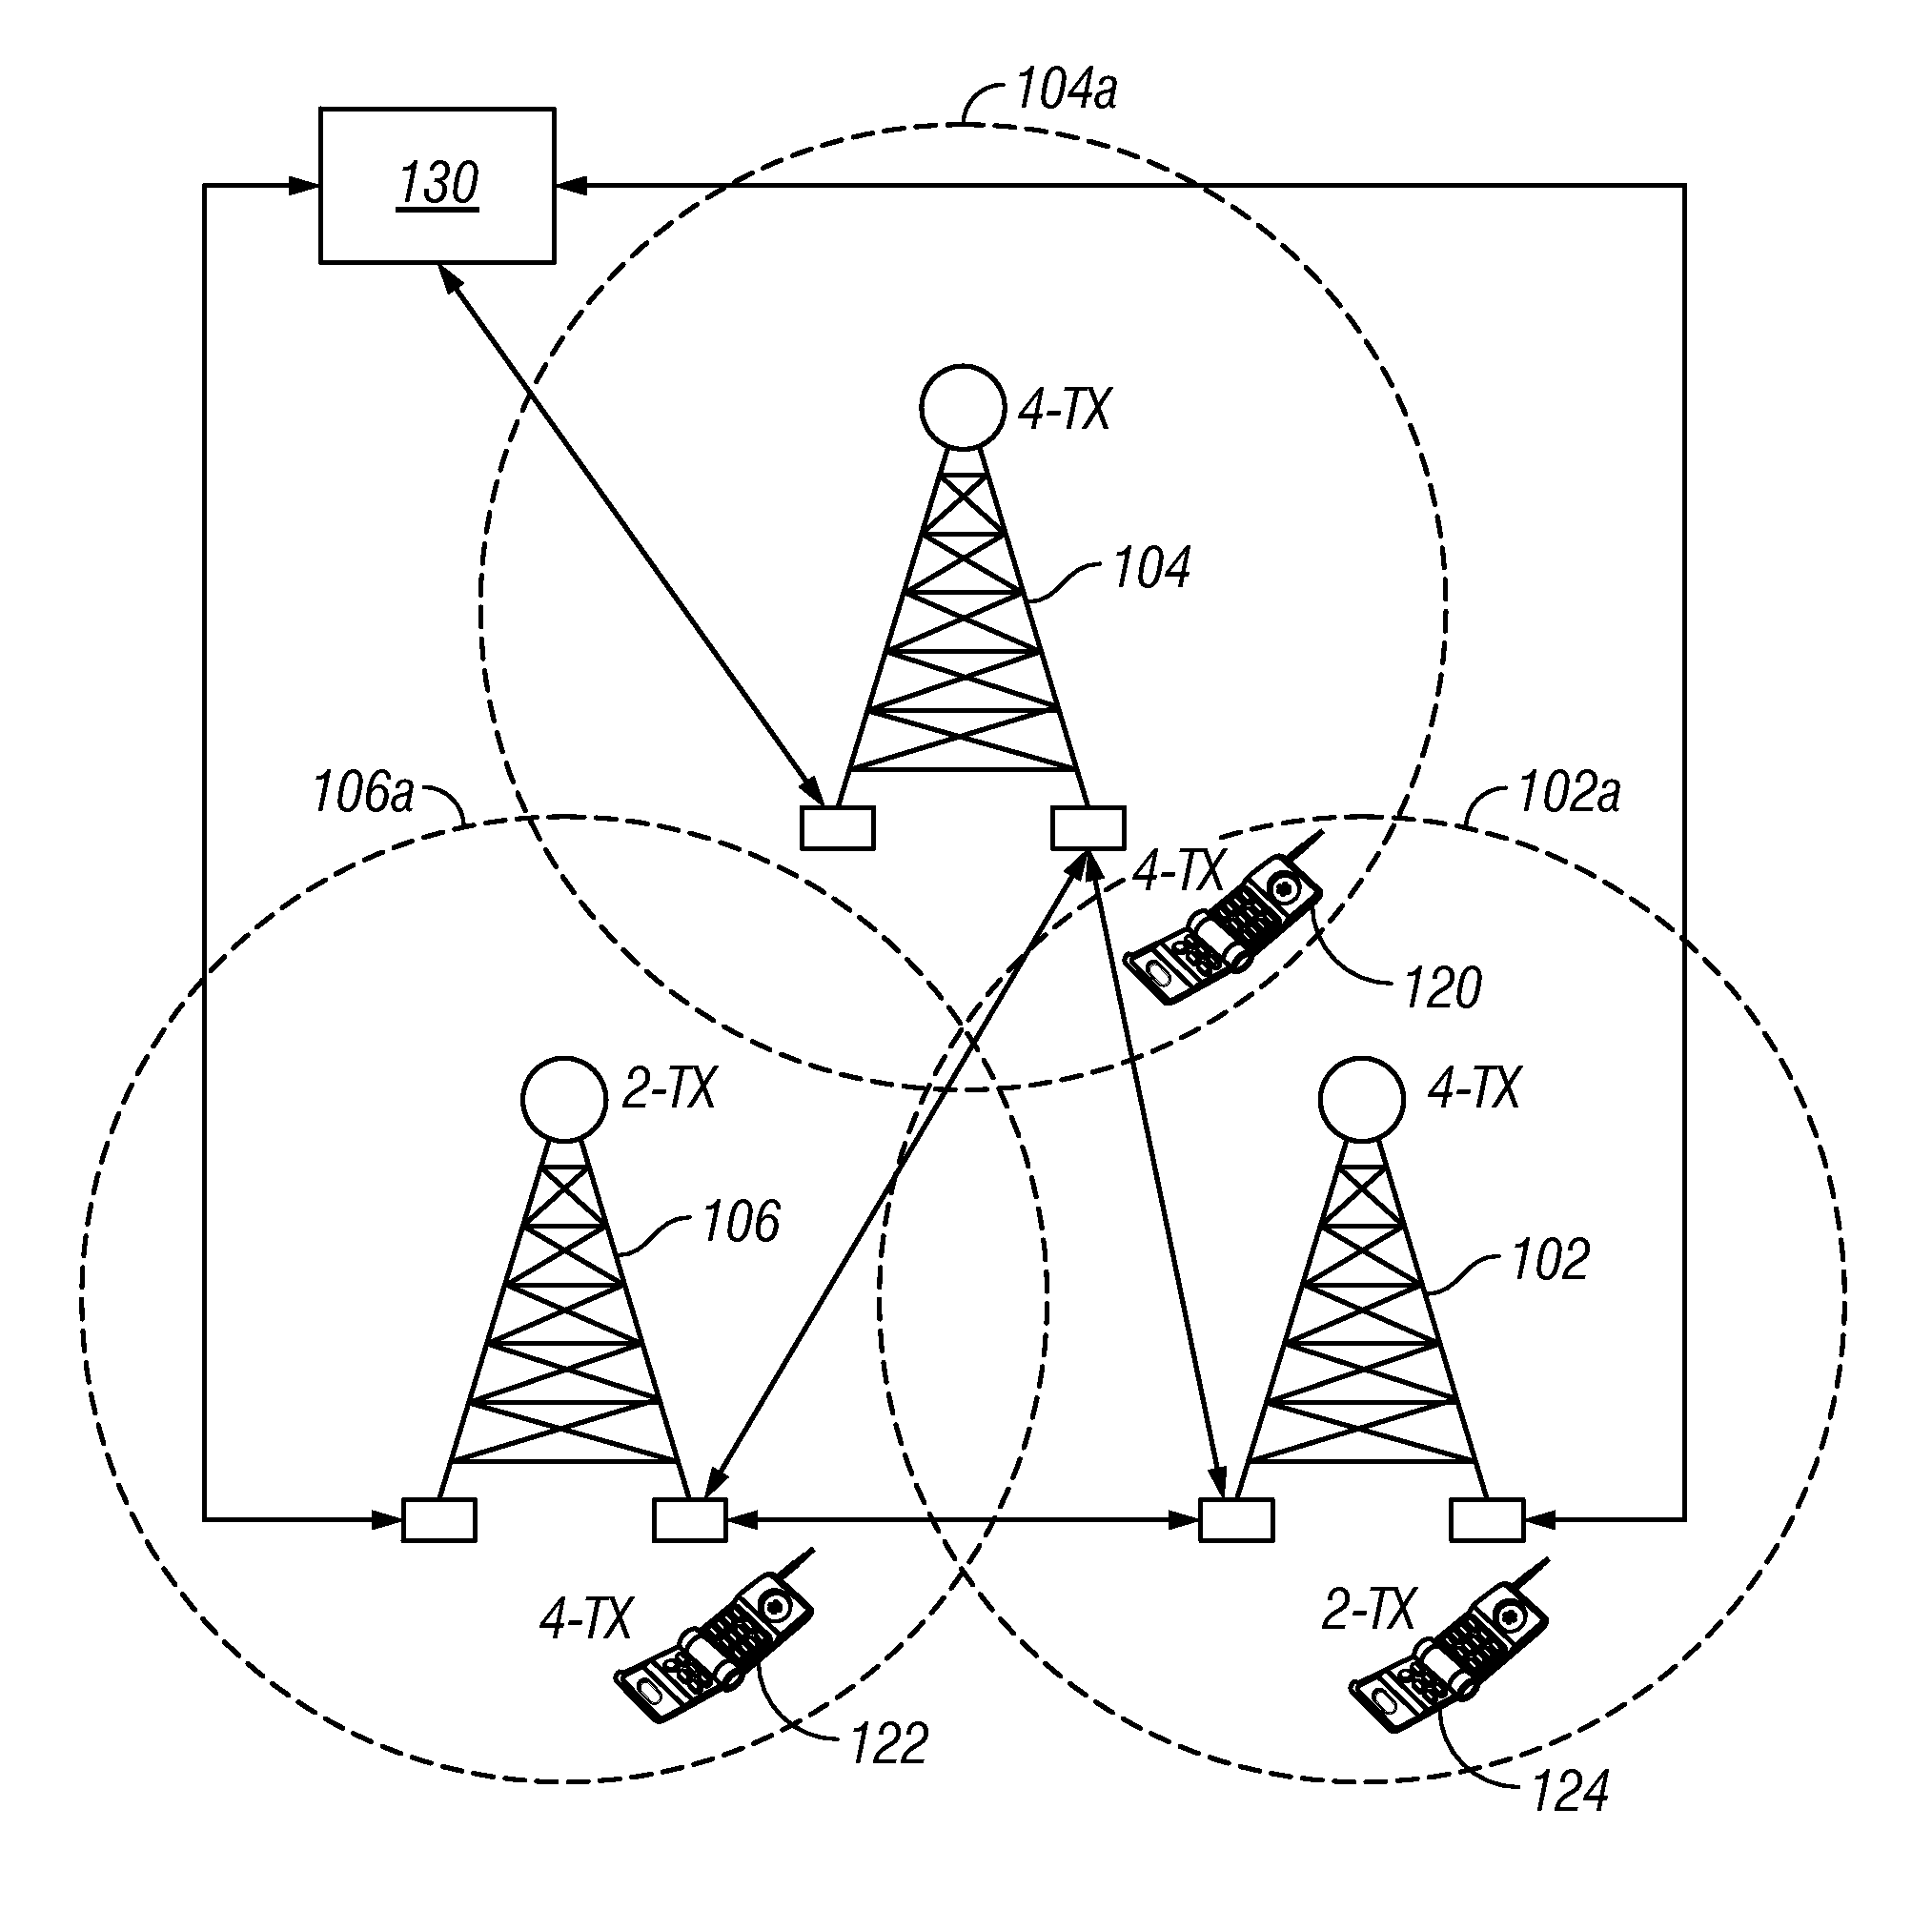 Method and system for optimized reference signal downlink transmission in a wireless communication system